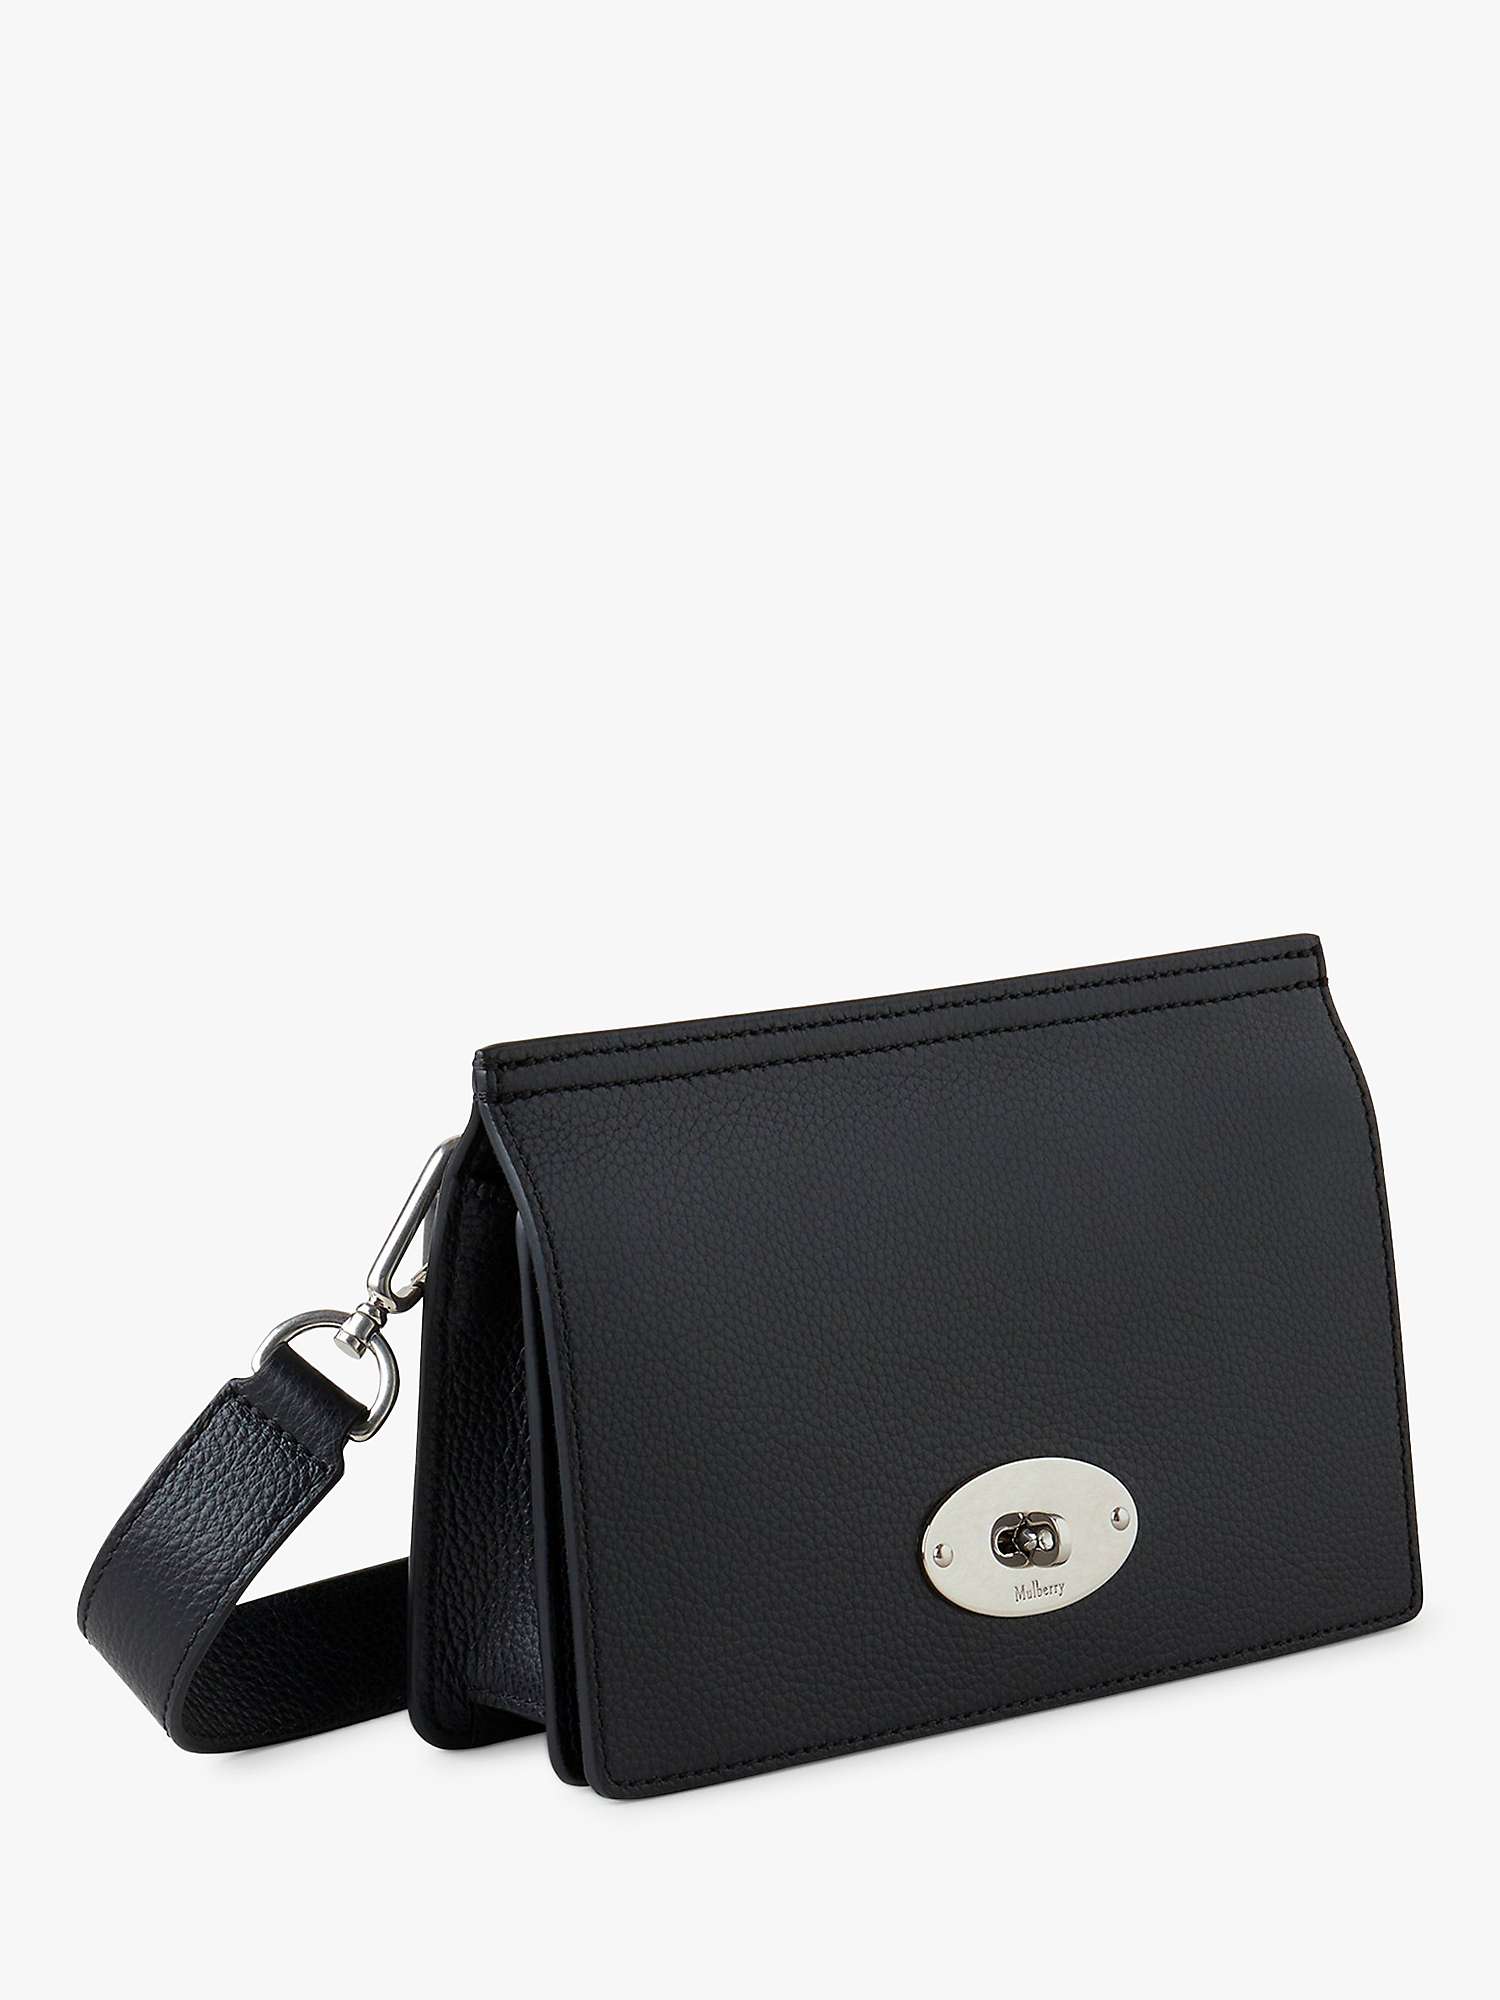 Buy Mulberry East West Antony Small Classic Grain Leather Crossbody Bag, Black Online at johnlewis.com